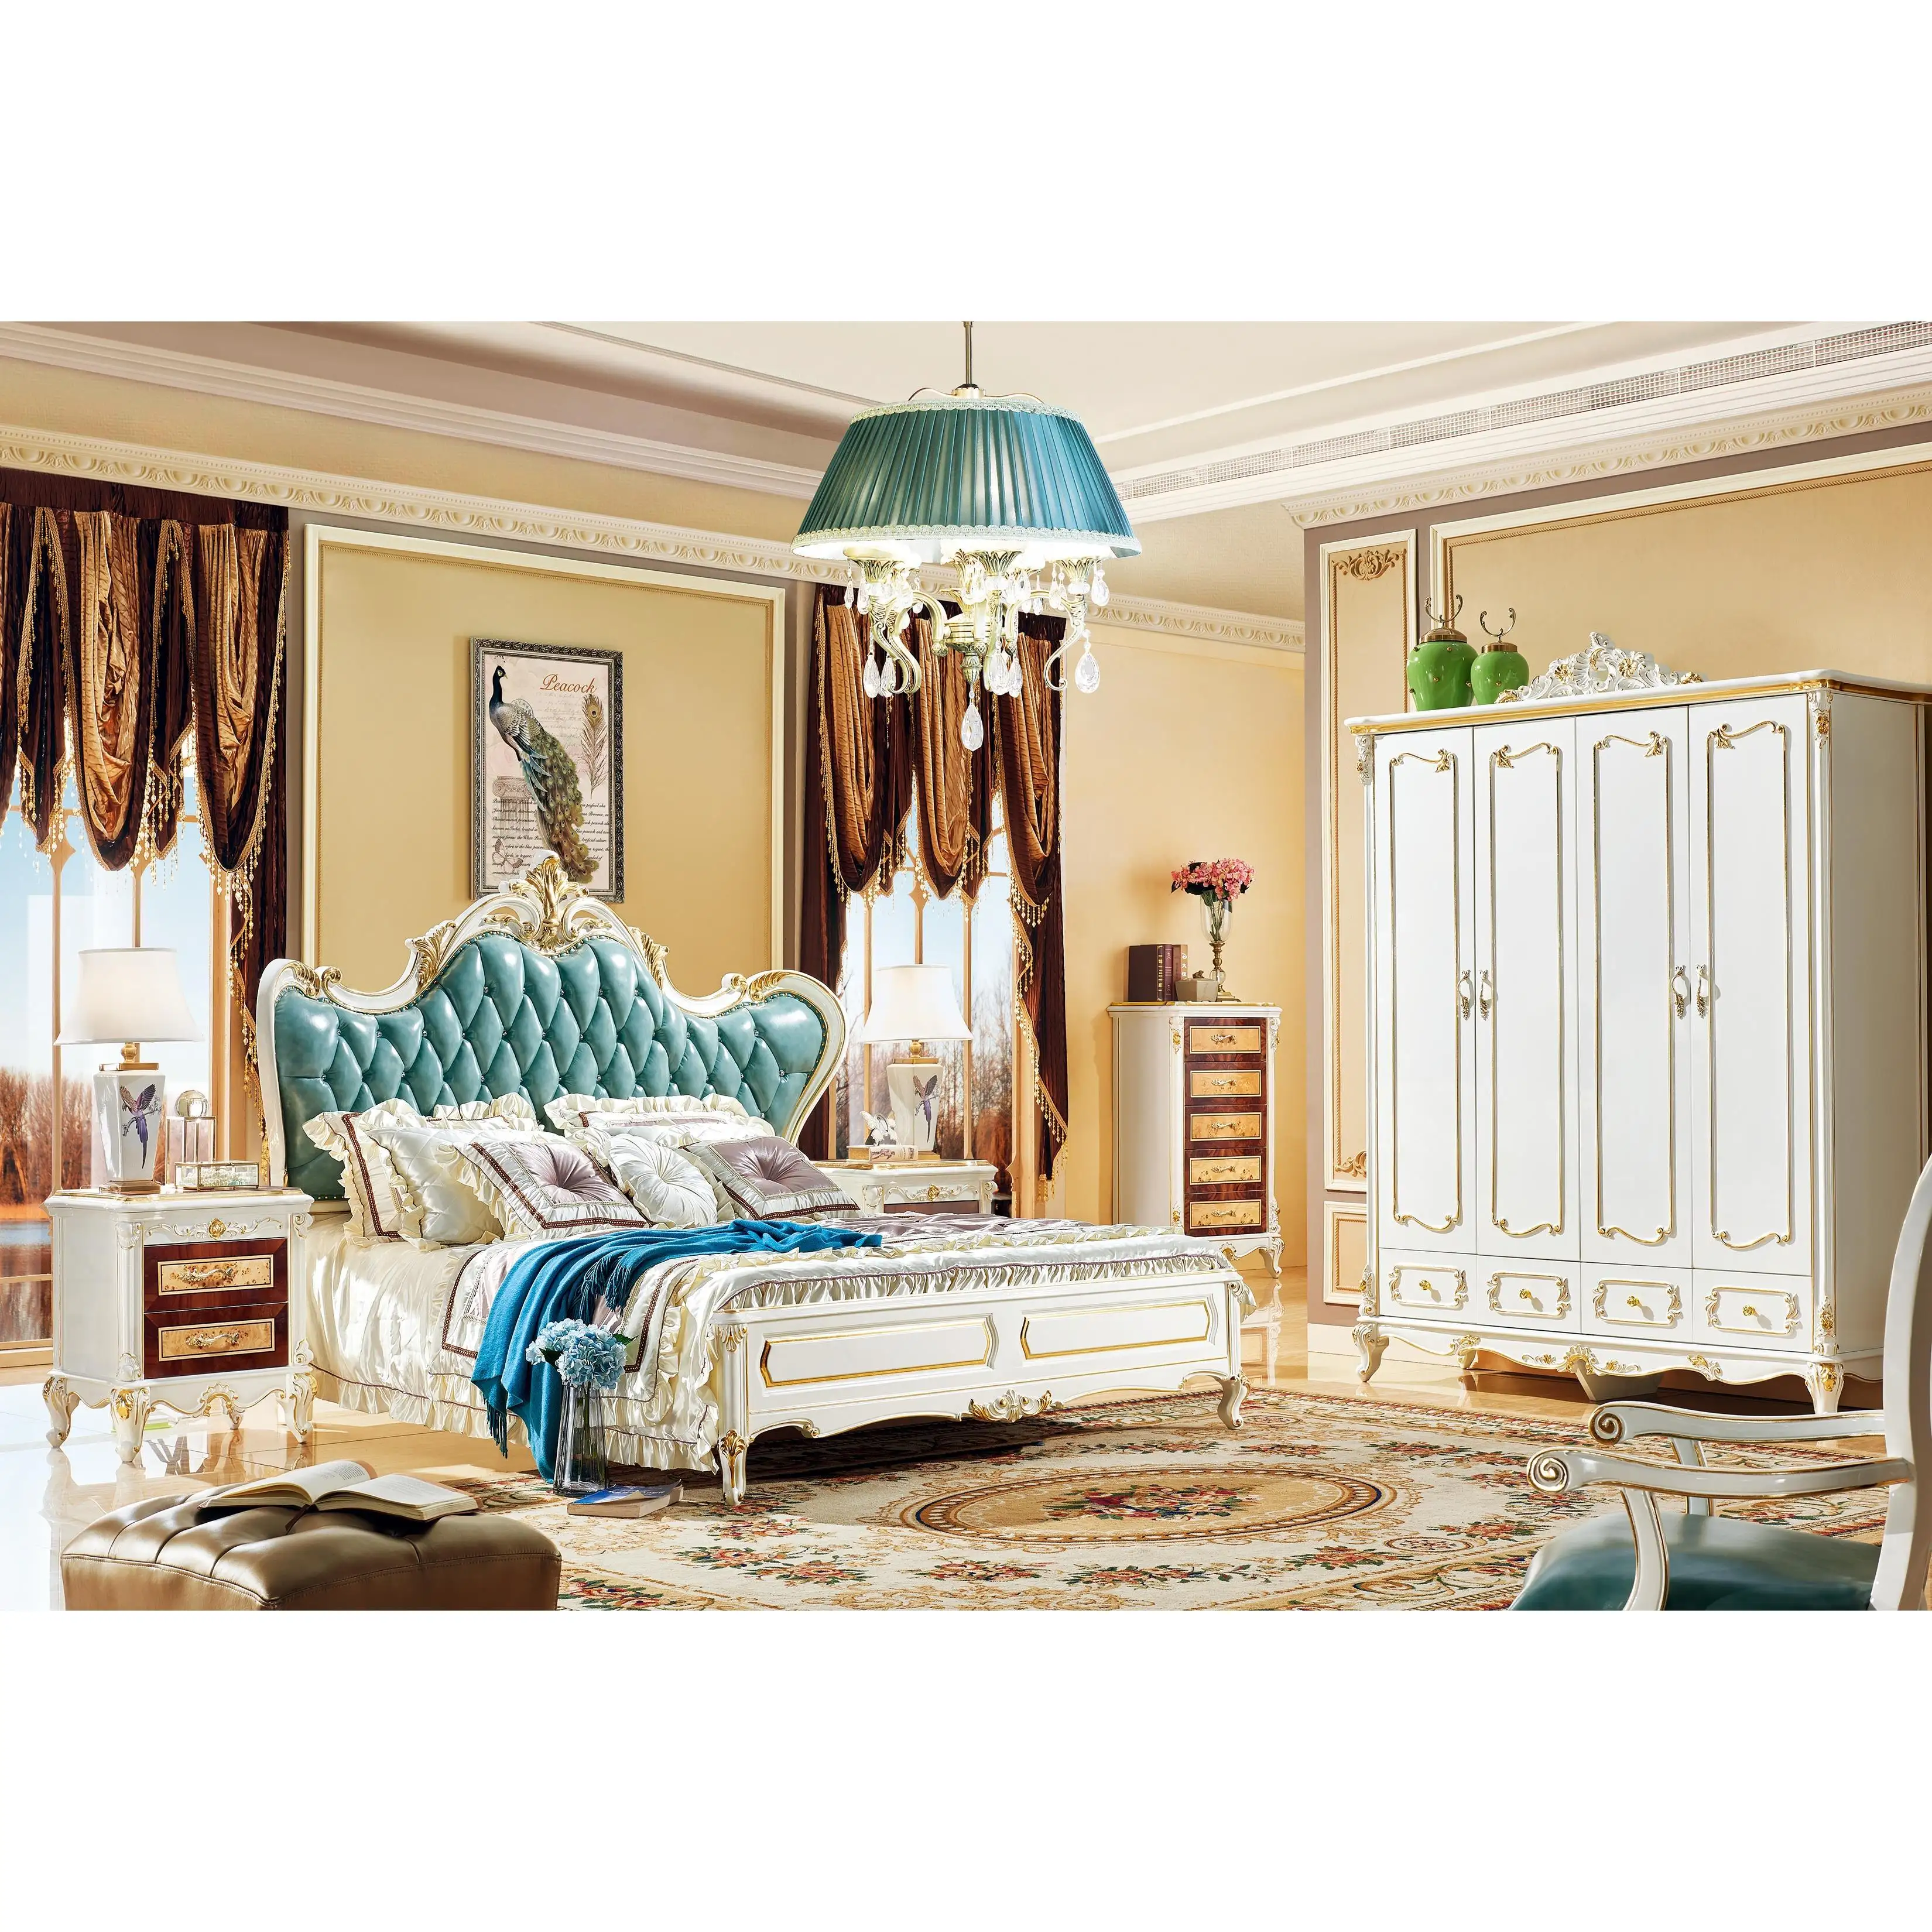 CBMMART Luxury Antique and Vintage Classic Furniture Sets Classic Style Latest King Size Wooden Beds